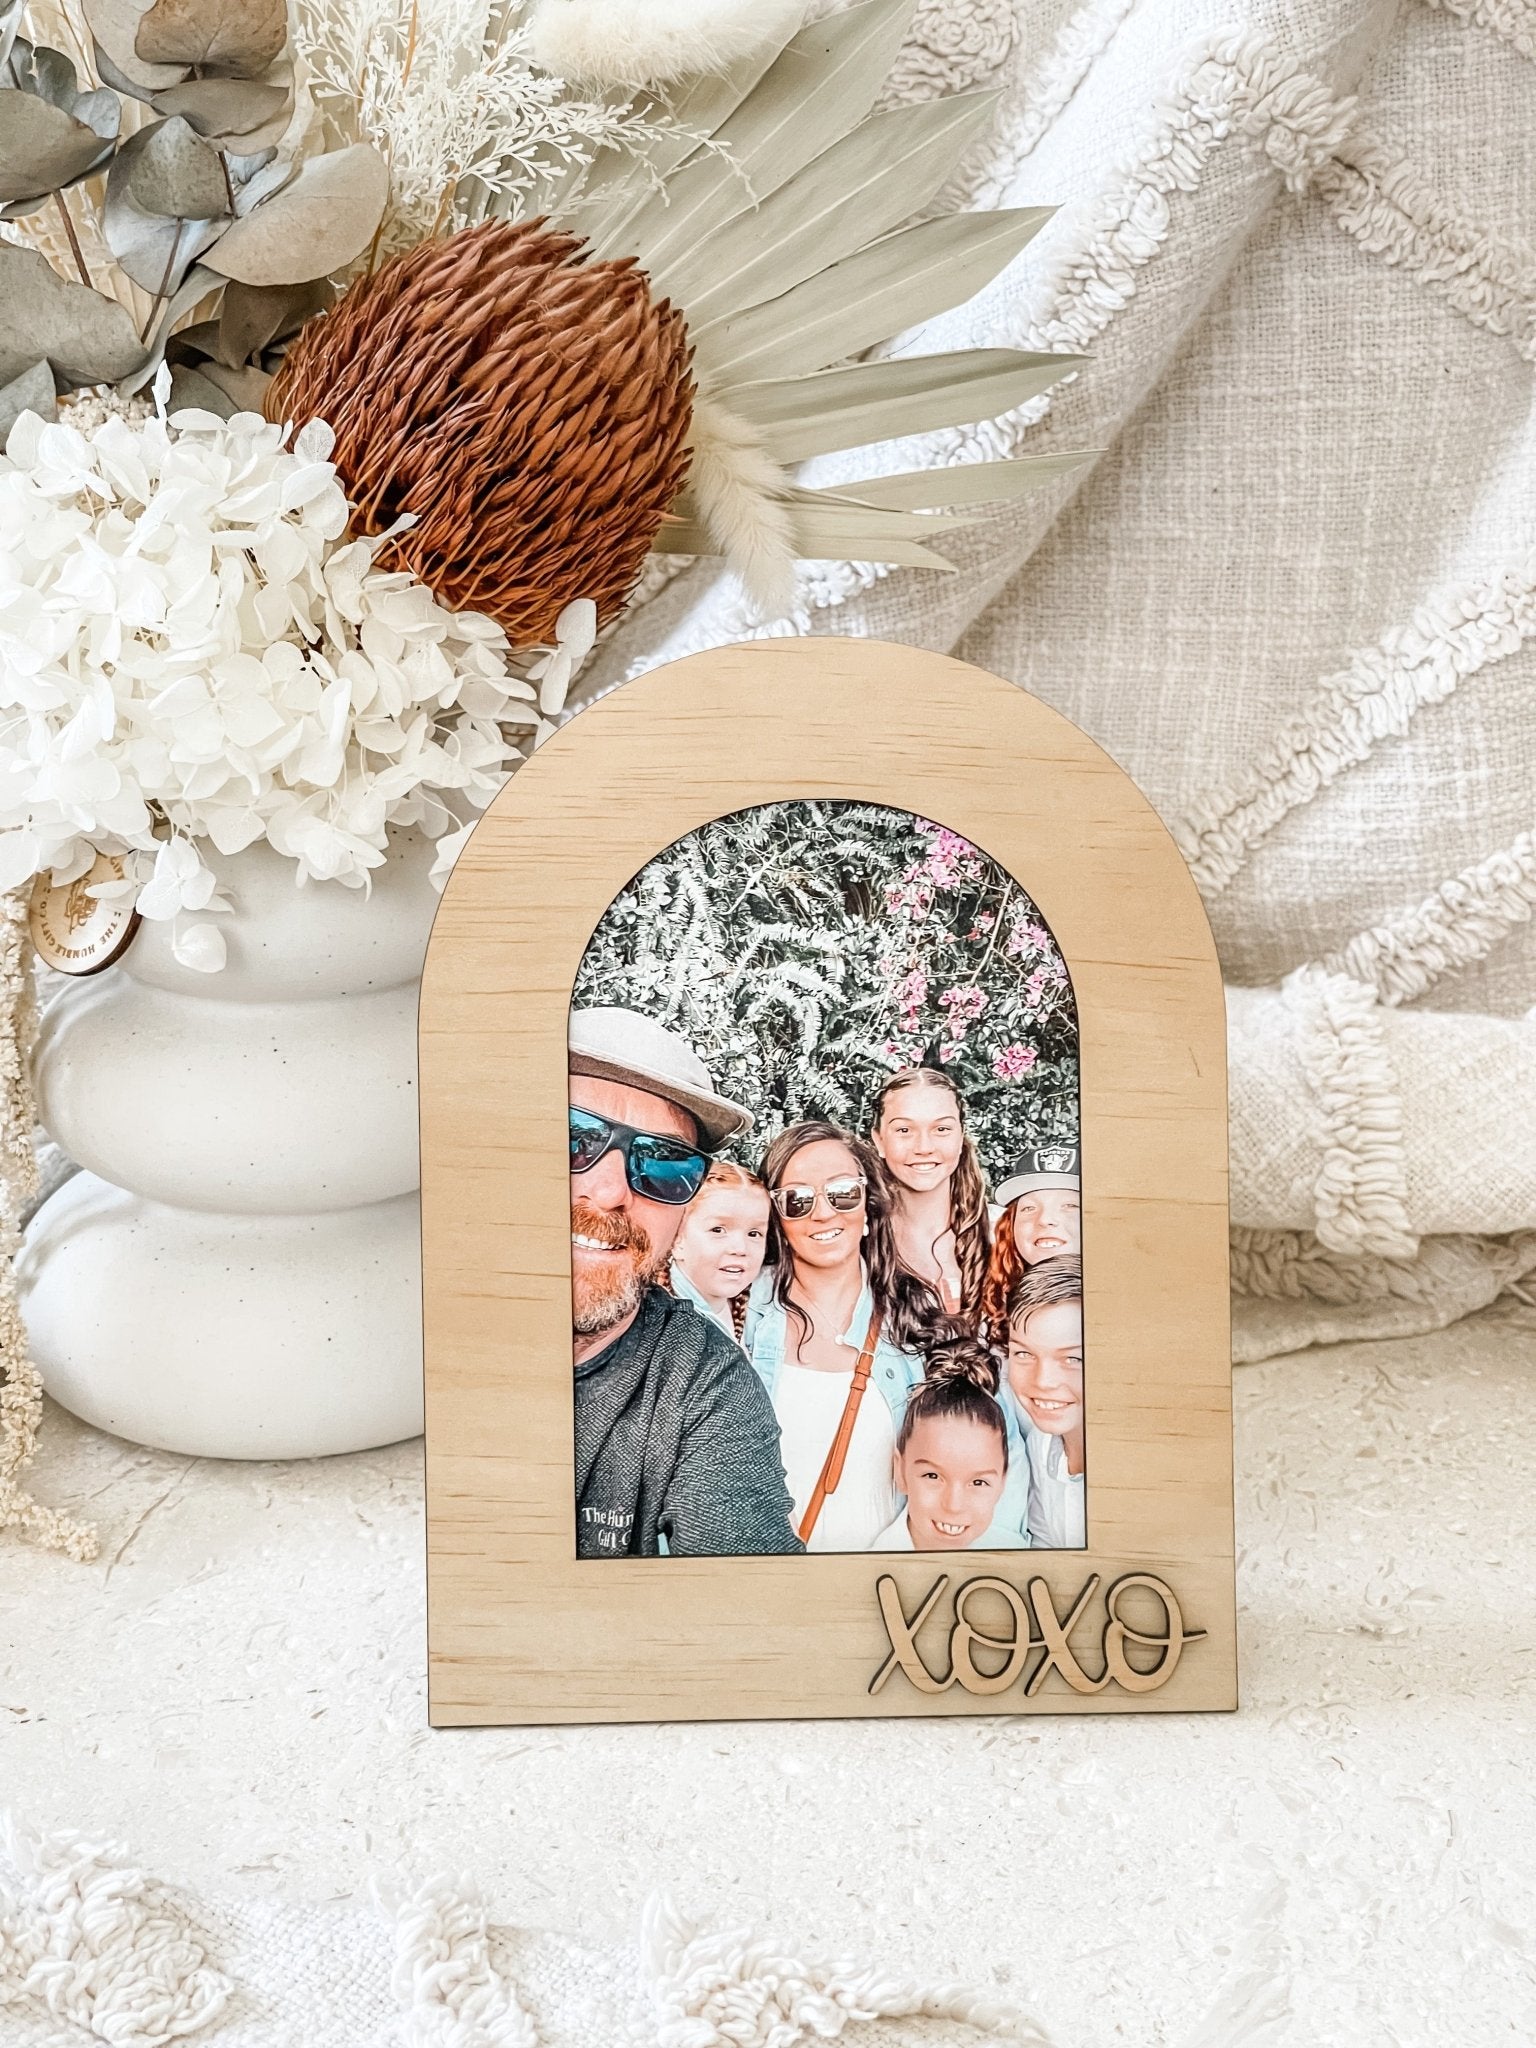 XOXO Arch Picture Frame - The Humble Gift Co.